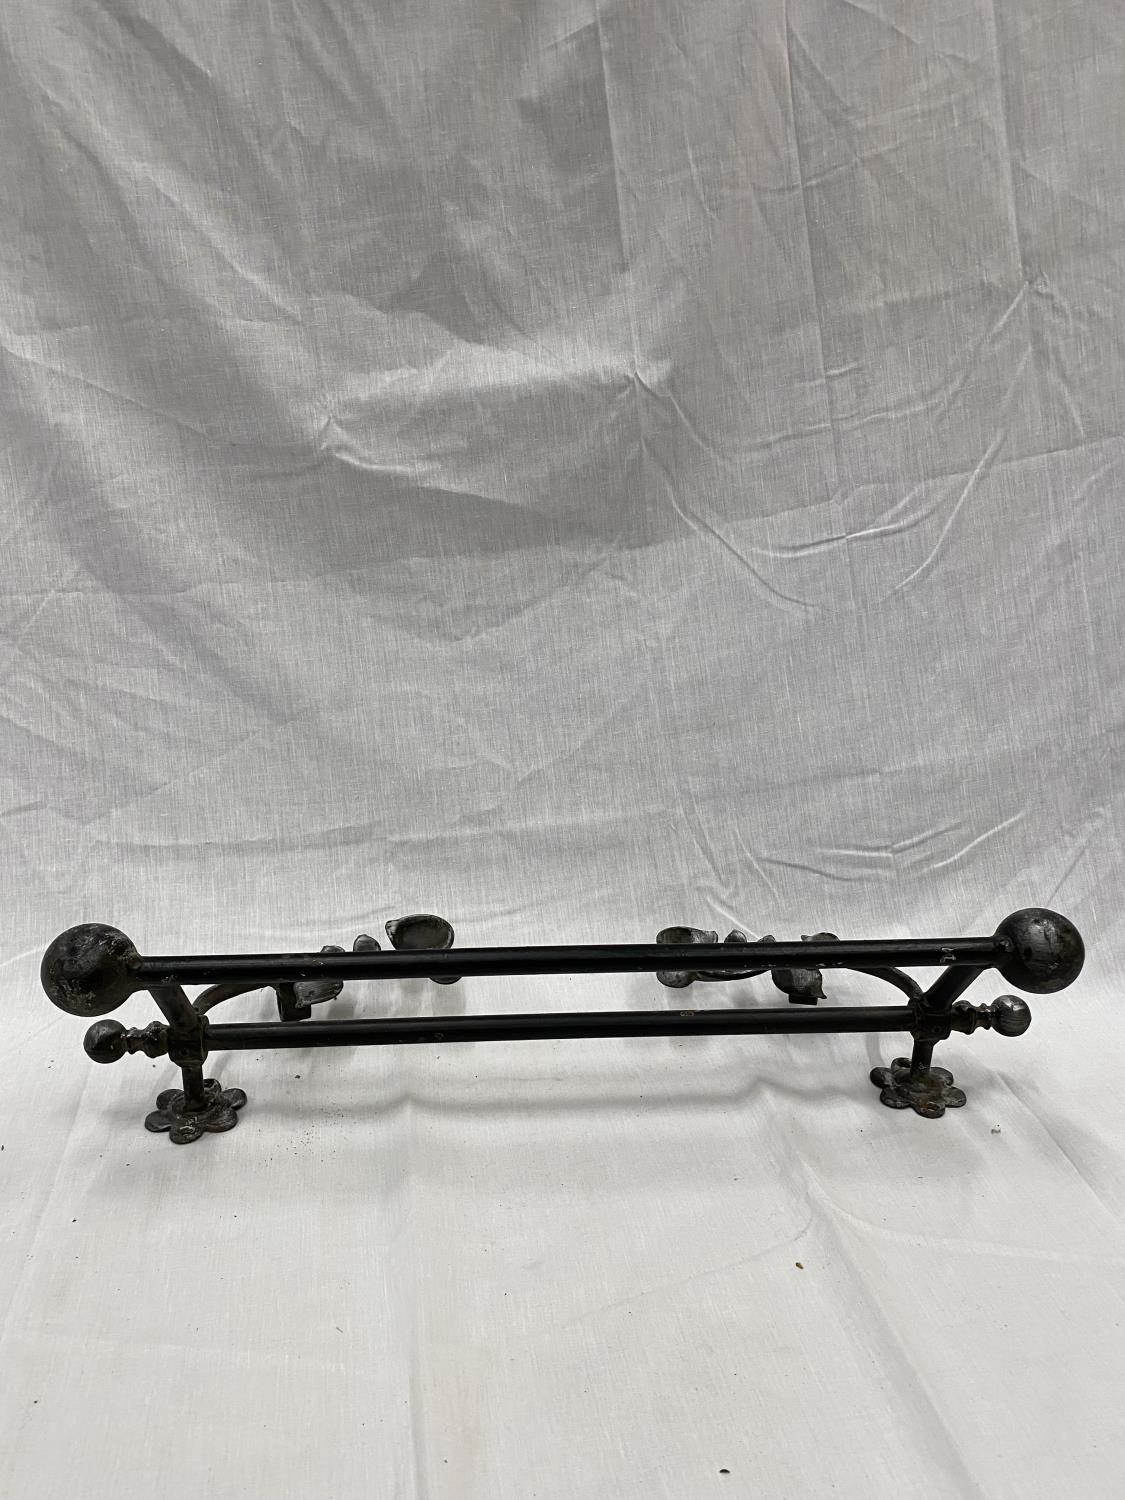 A DECORATIVE WROUGHT IRON WALL MOUNTED RACK/RAIL - Image 3 of 12